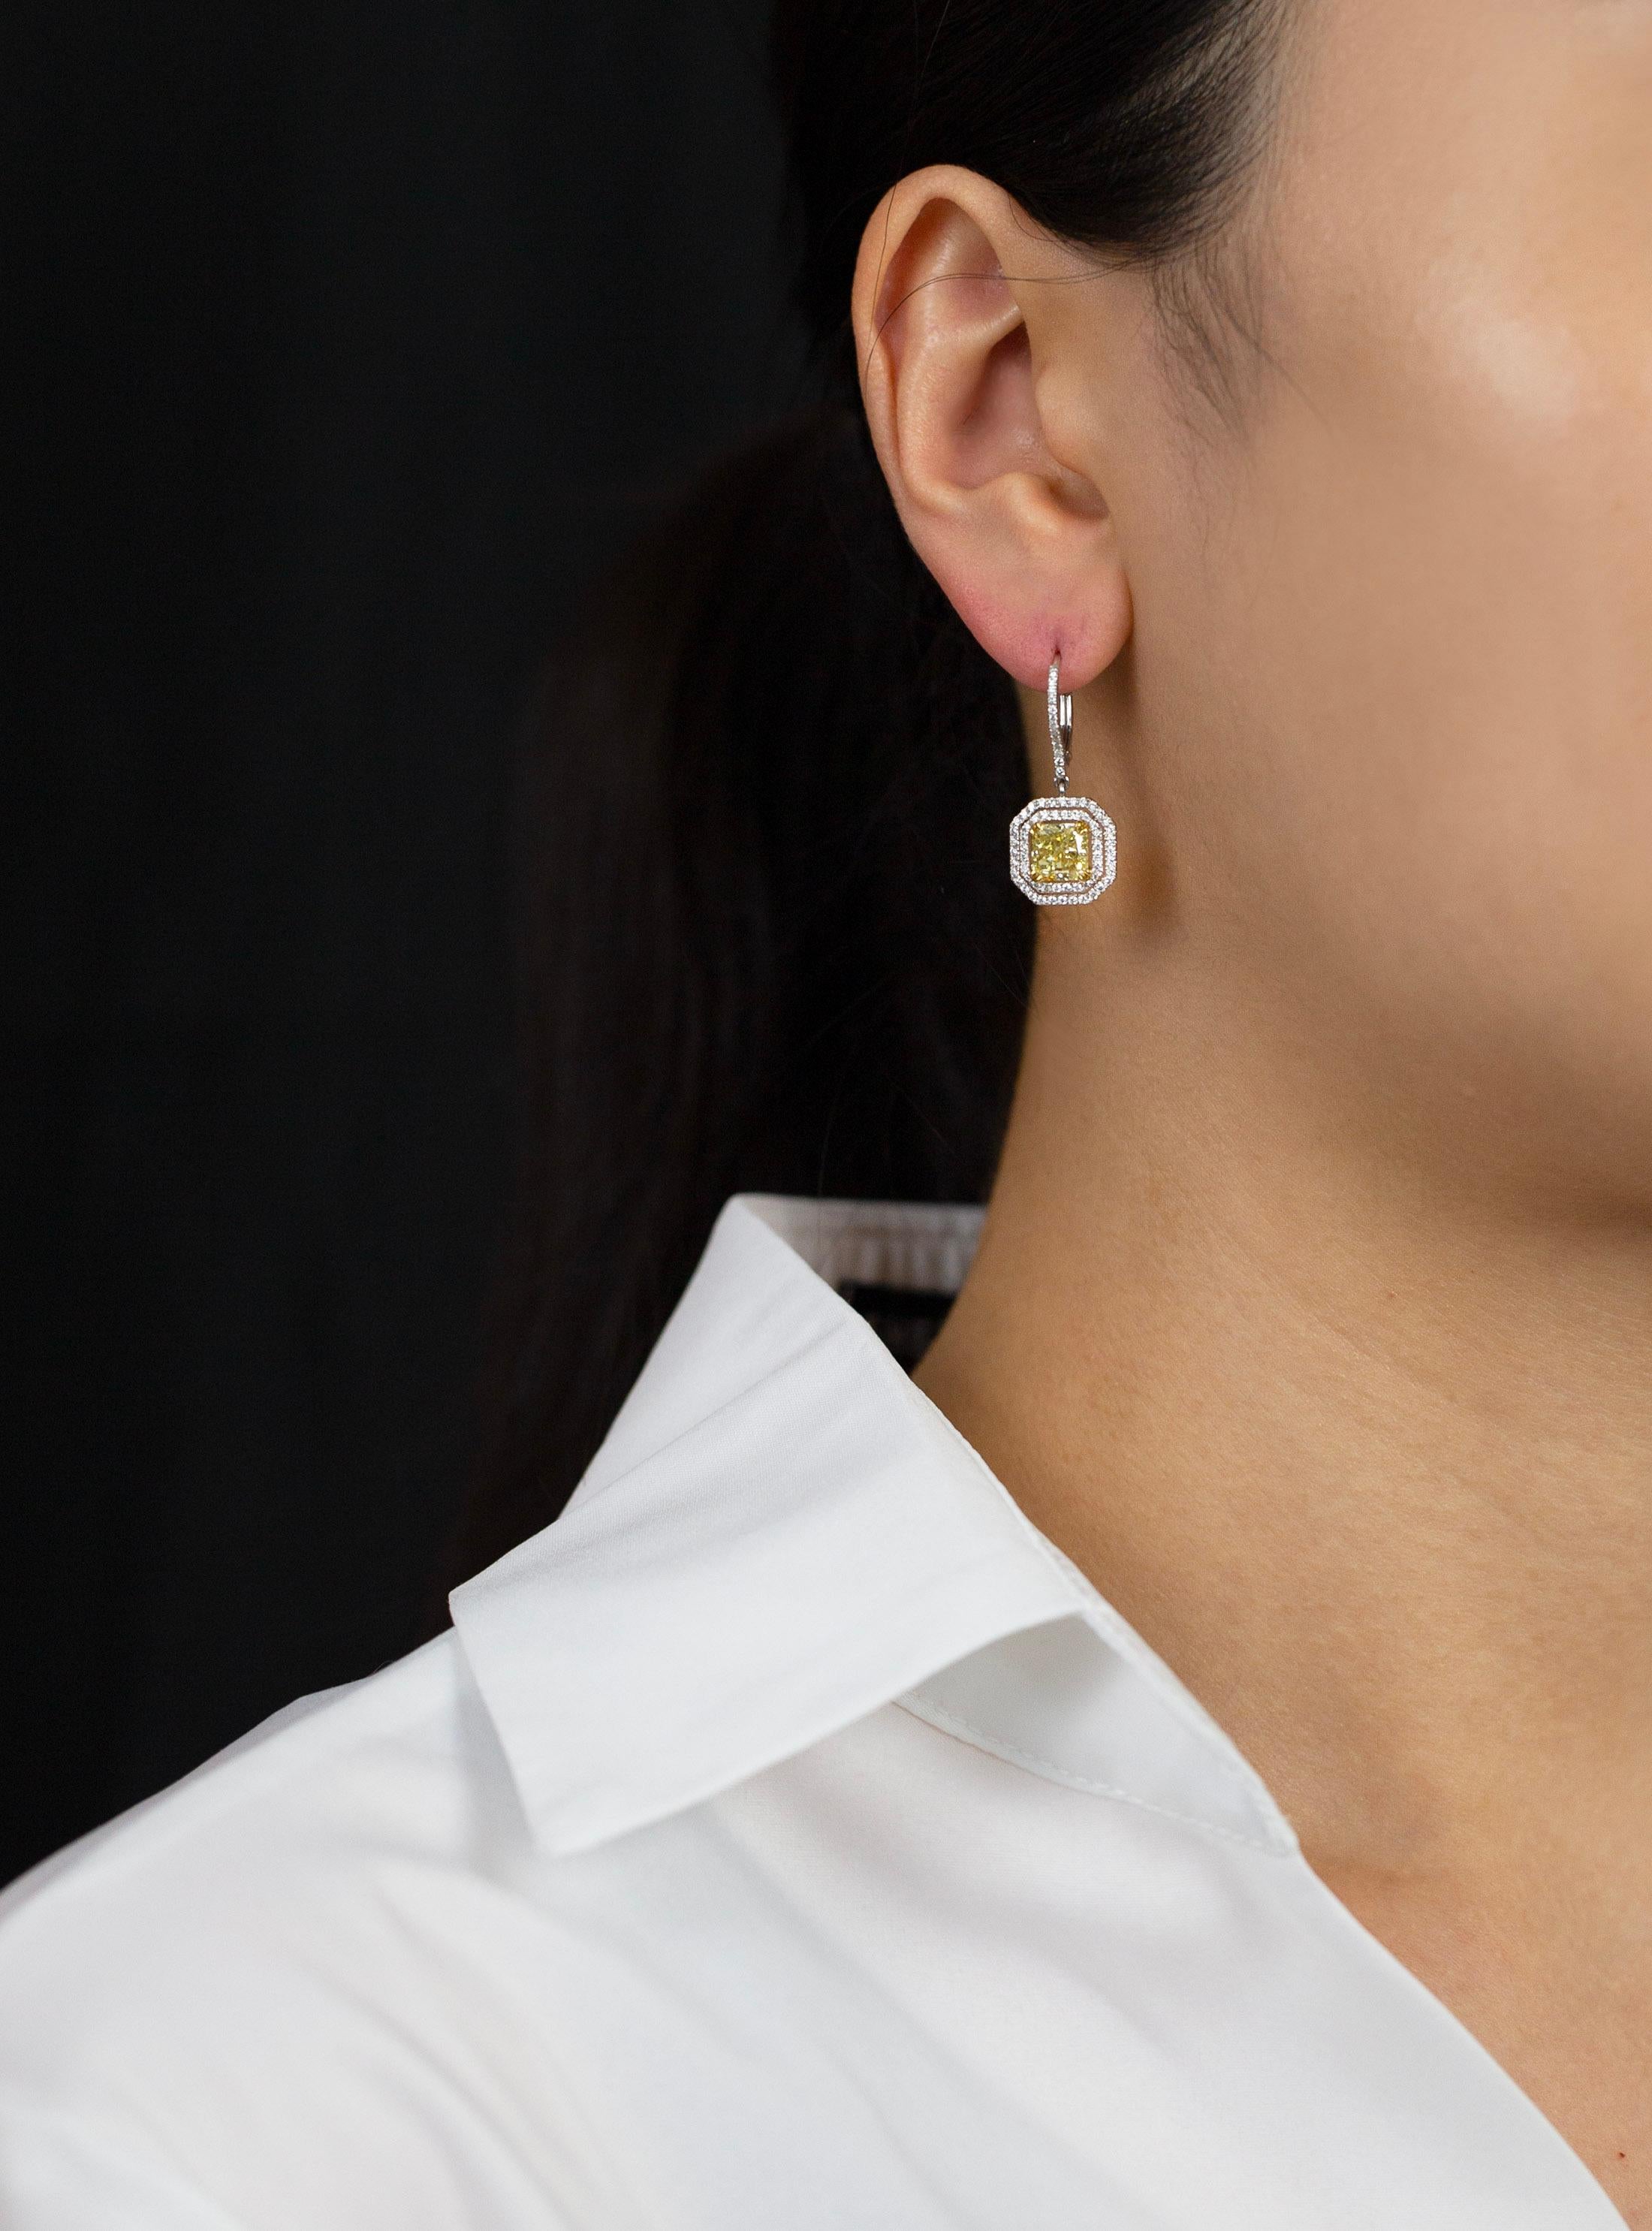 A beautiful and color-rich pair of dangle earrings showcasing radiant cut diamonds weighing 1.50 carats each, certified by GIA as fancy light yellow color and SI1-VS2 in clarity respectively. Surrounded by double row of brilliant round diamonds in a